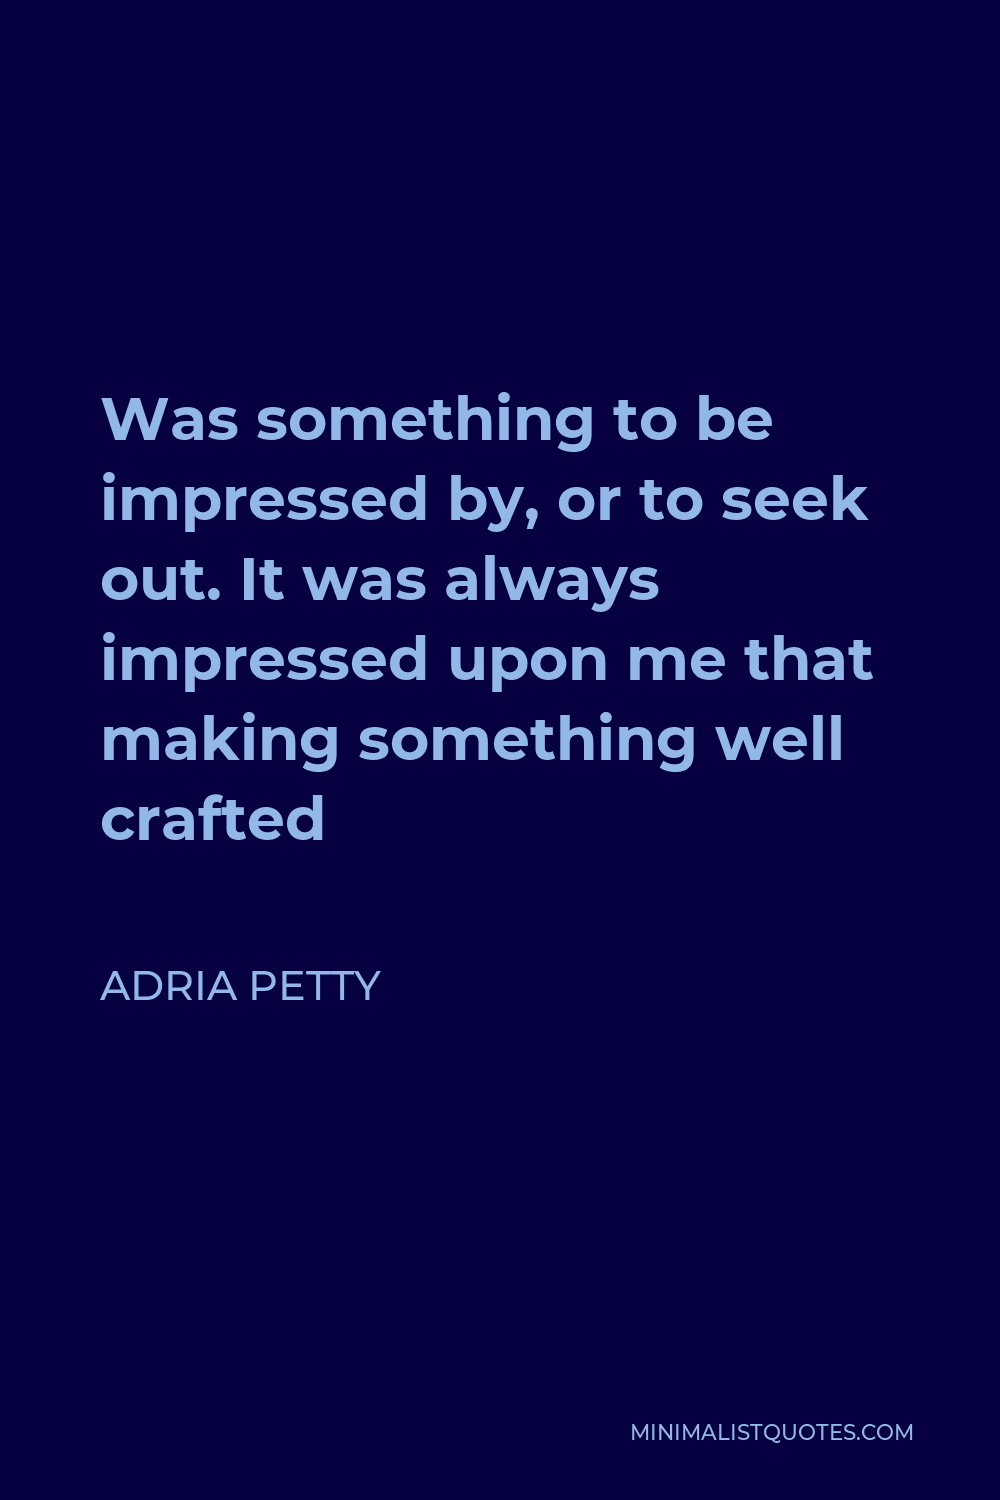 Adria Petty Quote - Was something to be impressed by, or to seek out. It was always impressed upon me that making something well crafted